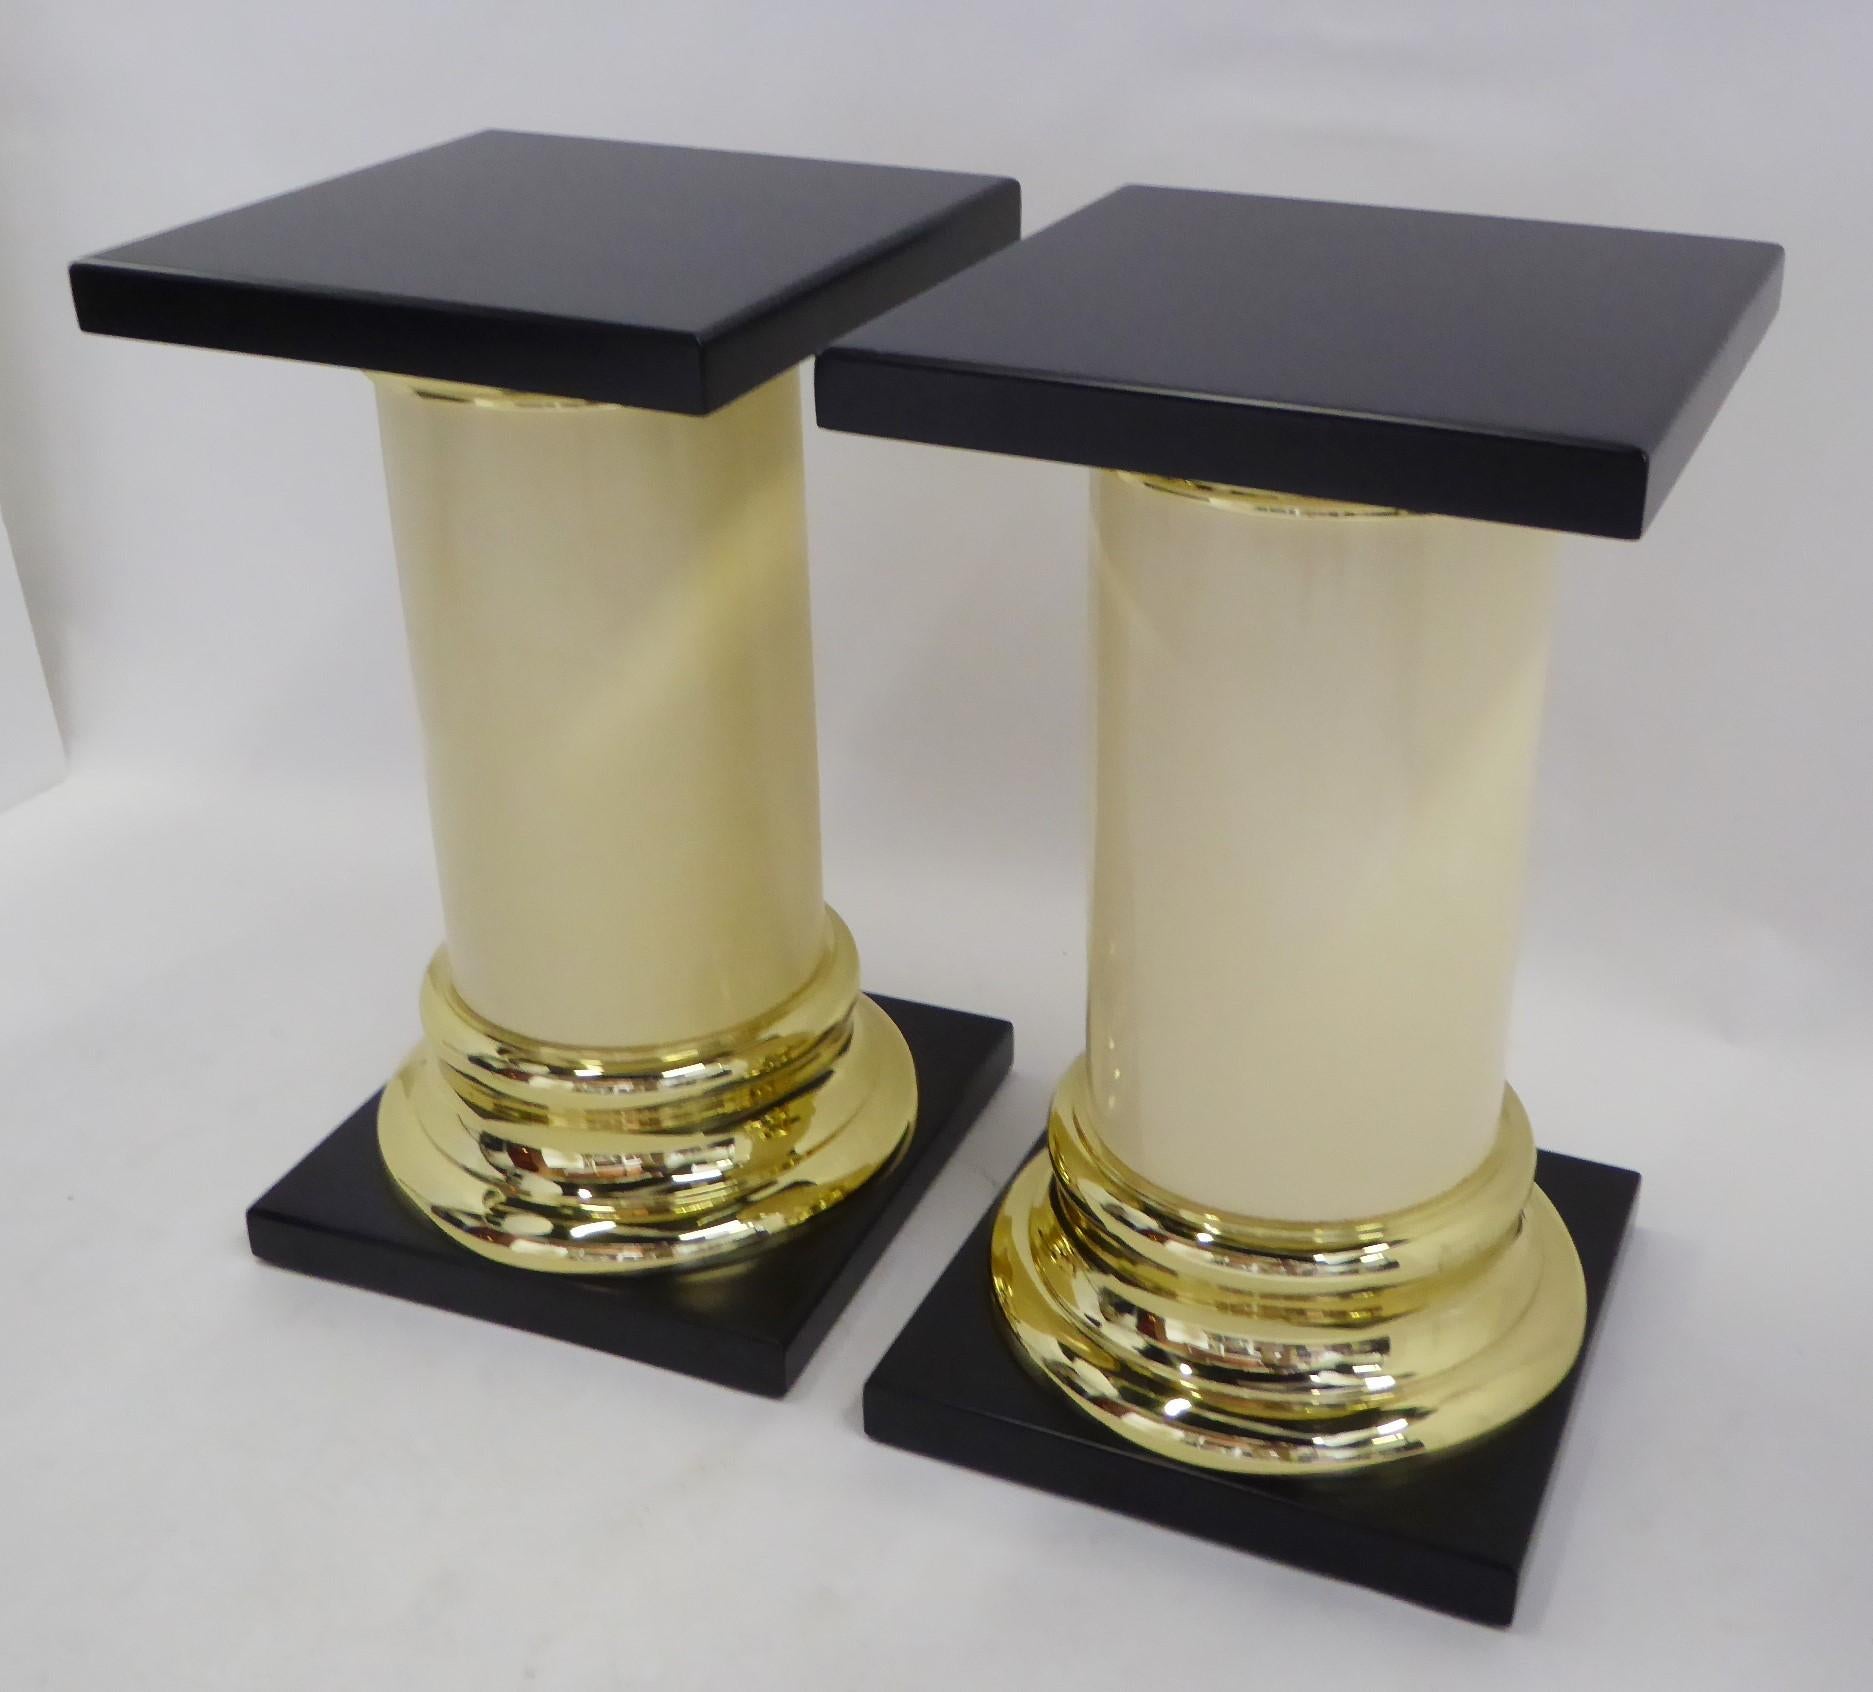 Lacquered Modern Pair Mastercraft Columnar Pedestals Side Tables Neoclassical Style 1960s